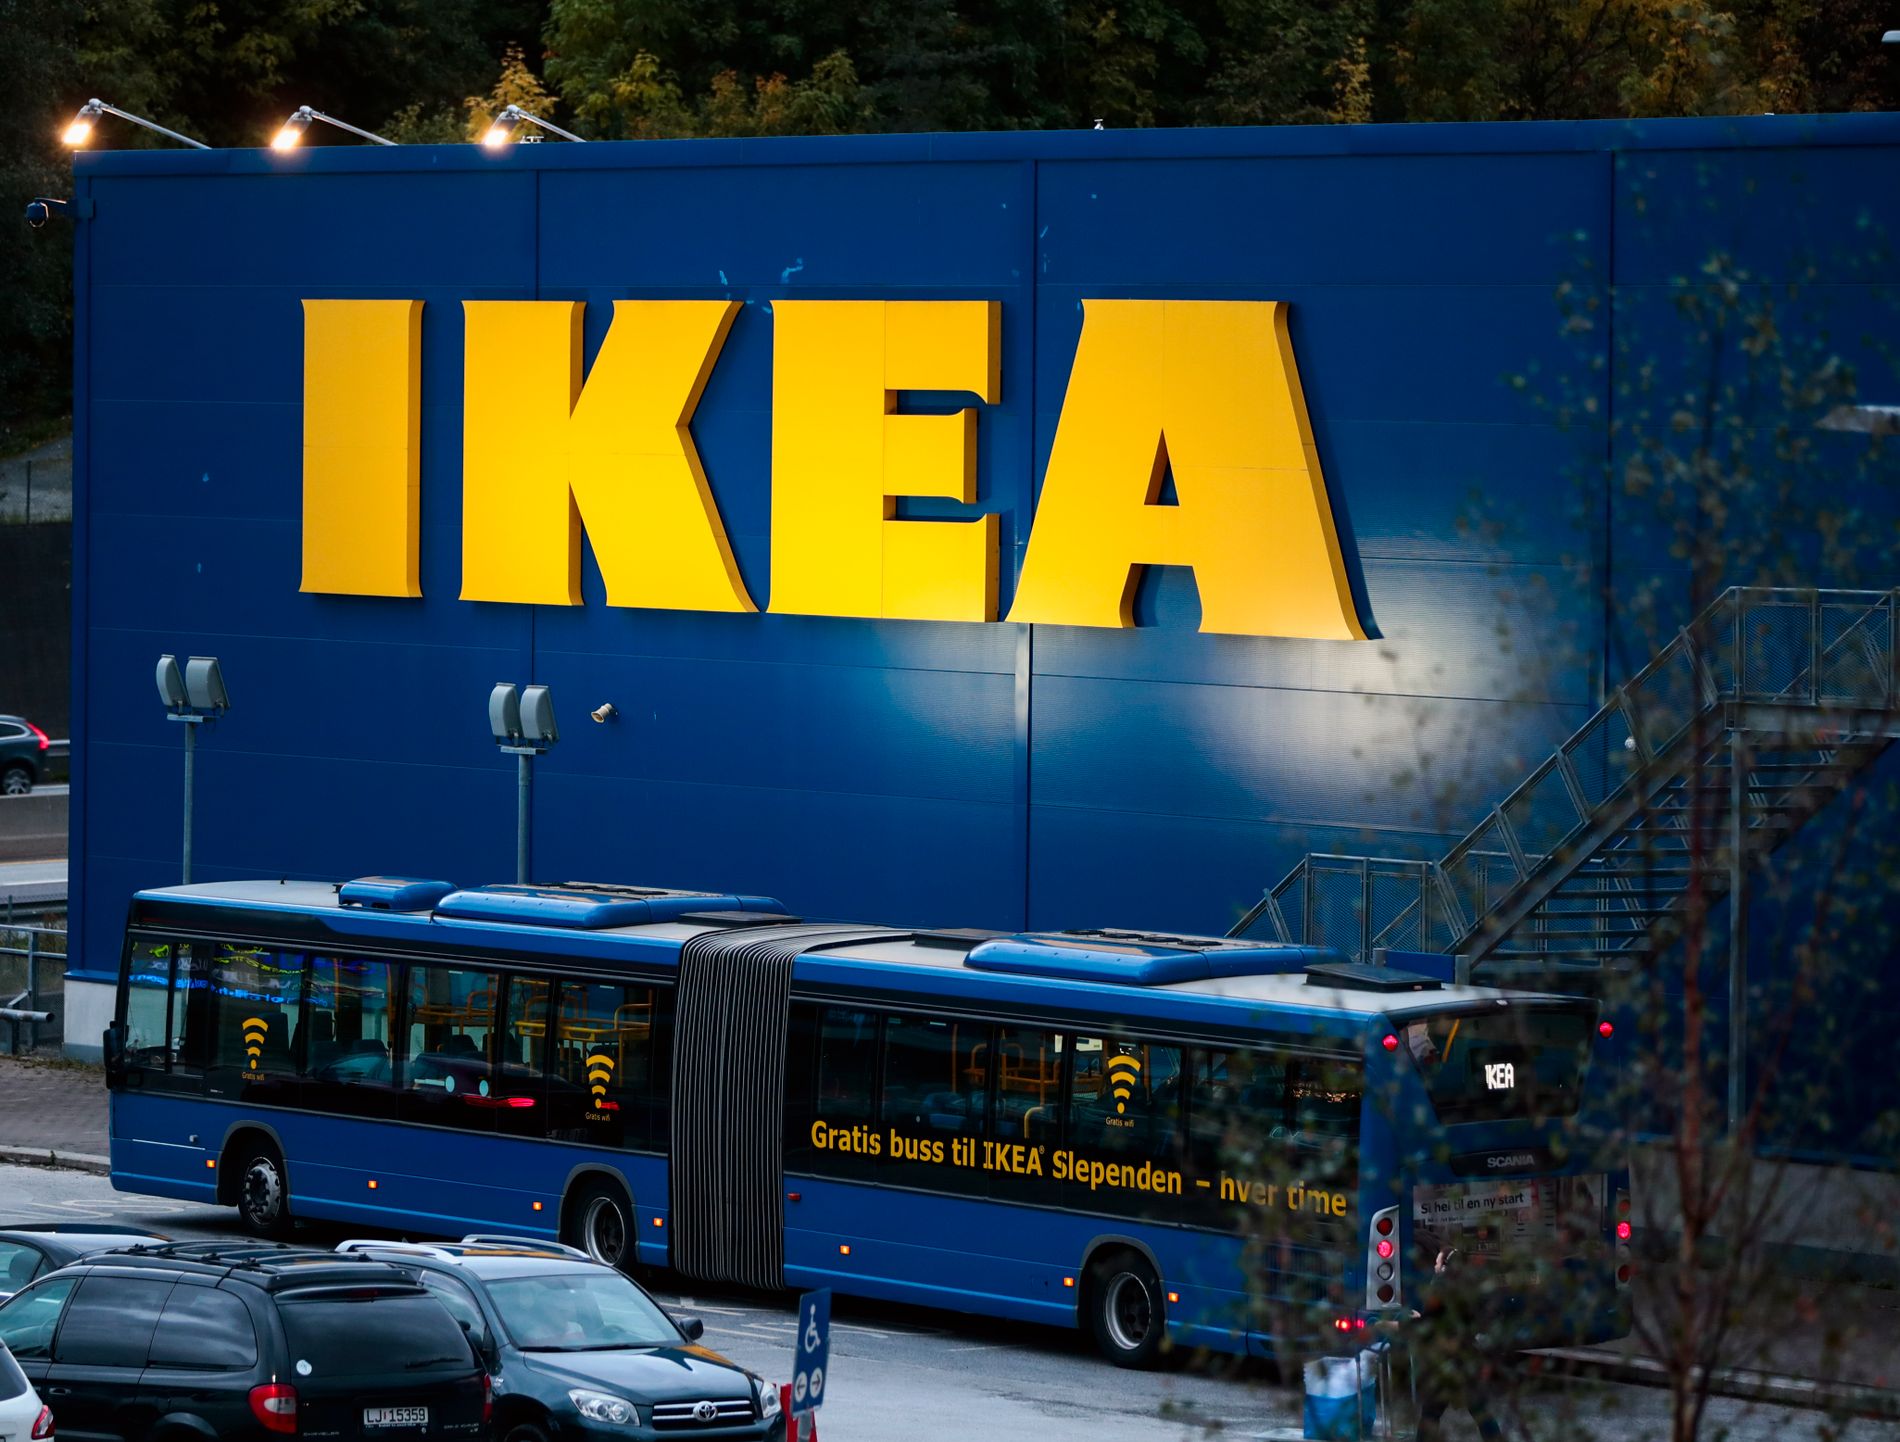 IKEA owner warns of high prices - E24